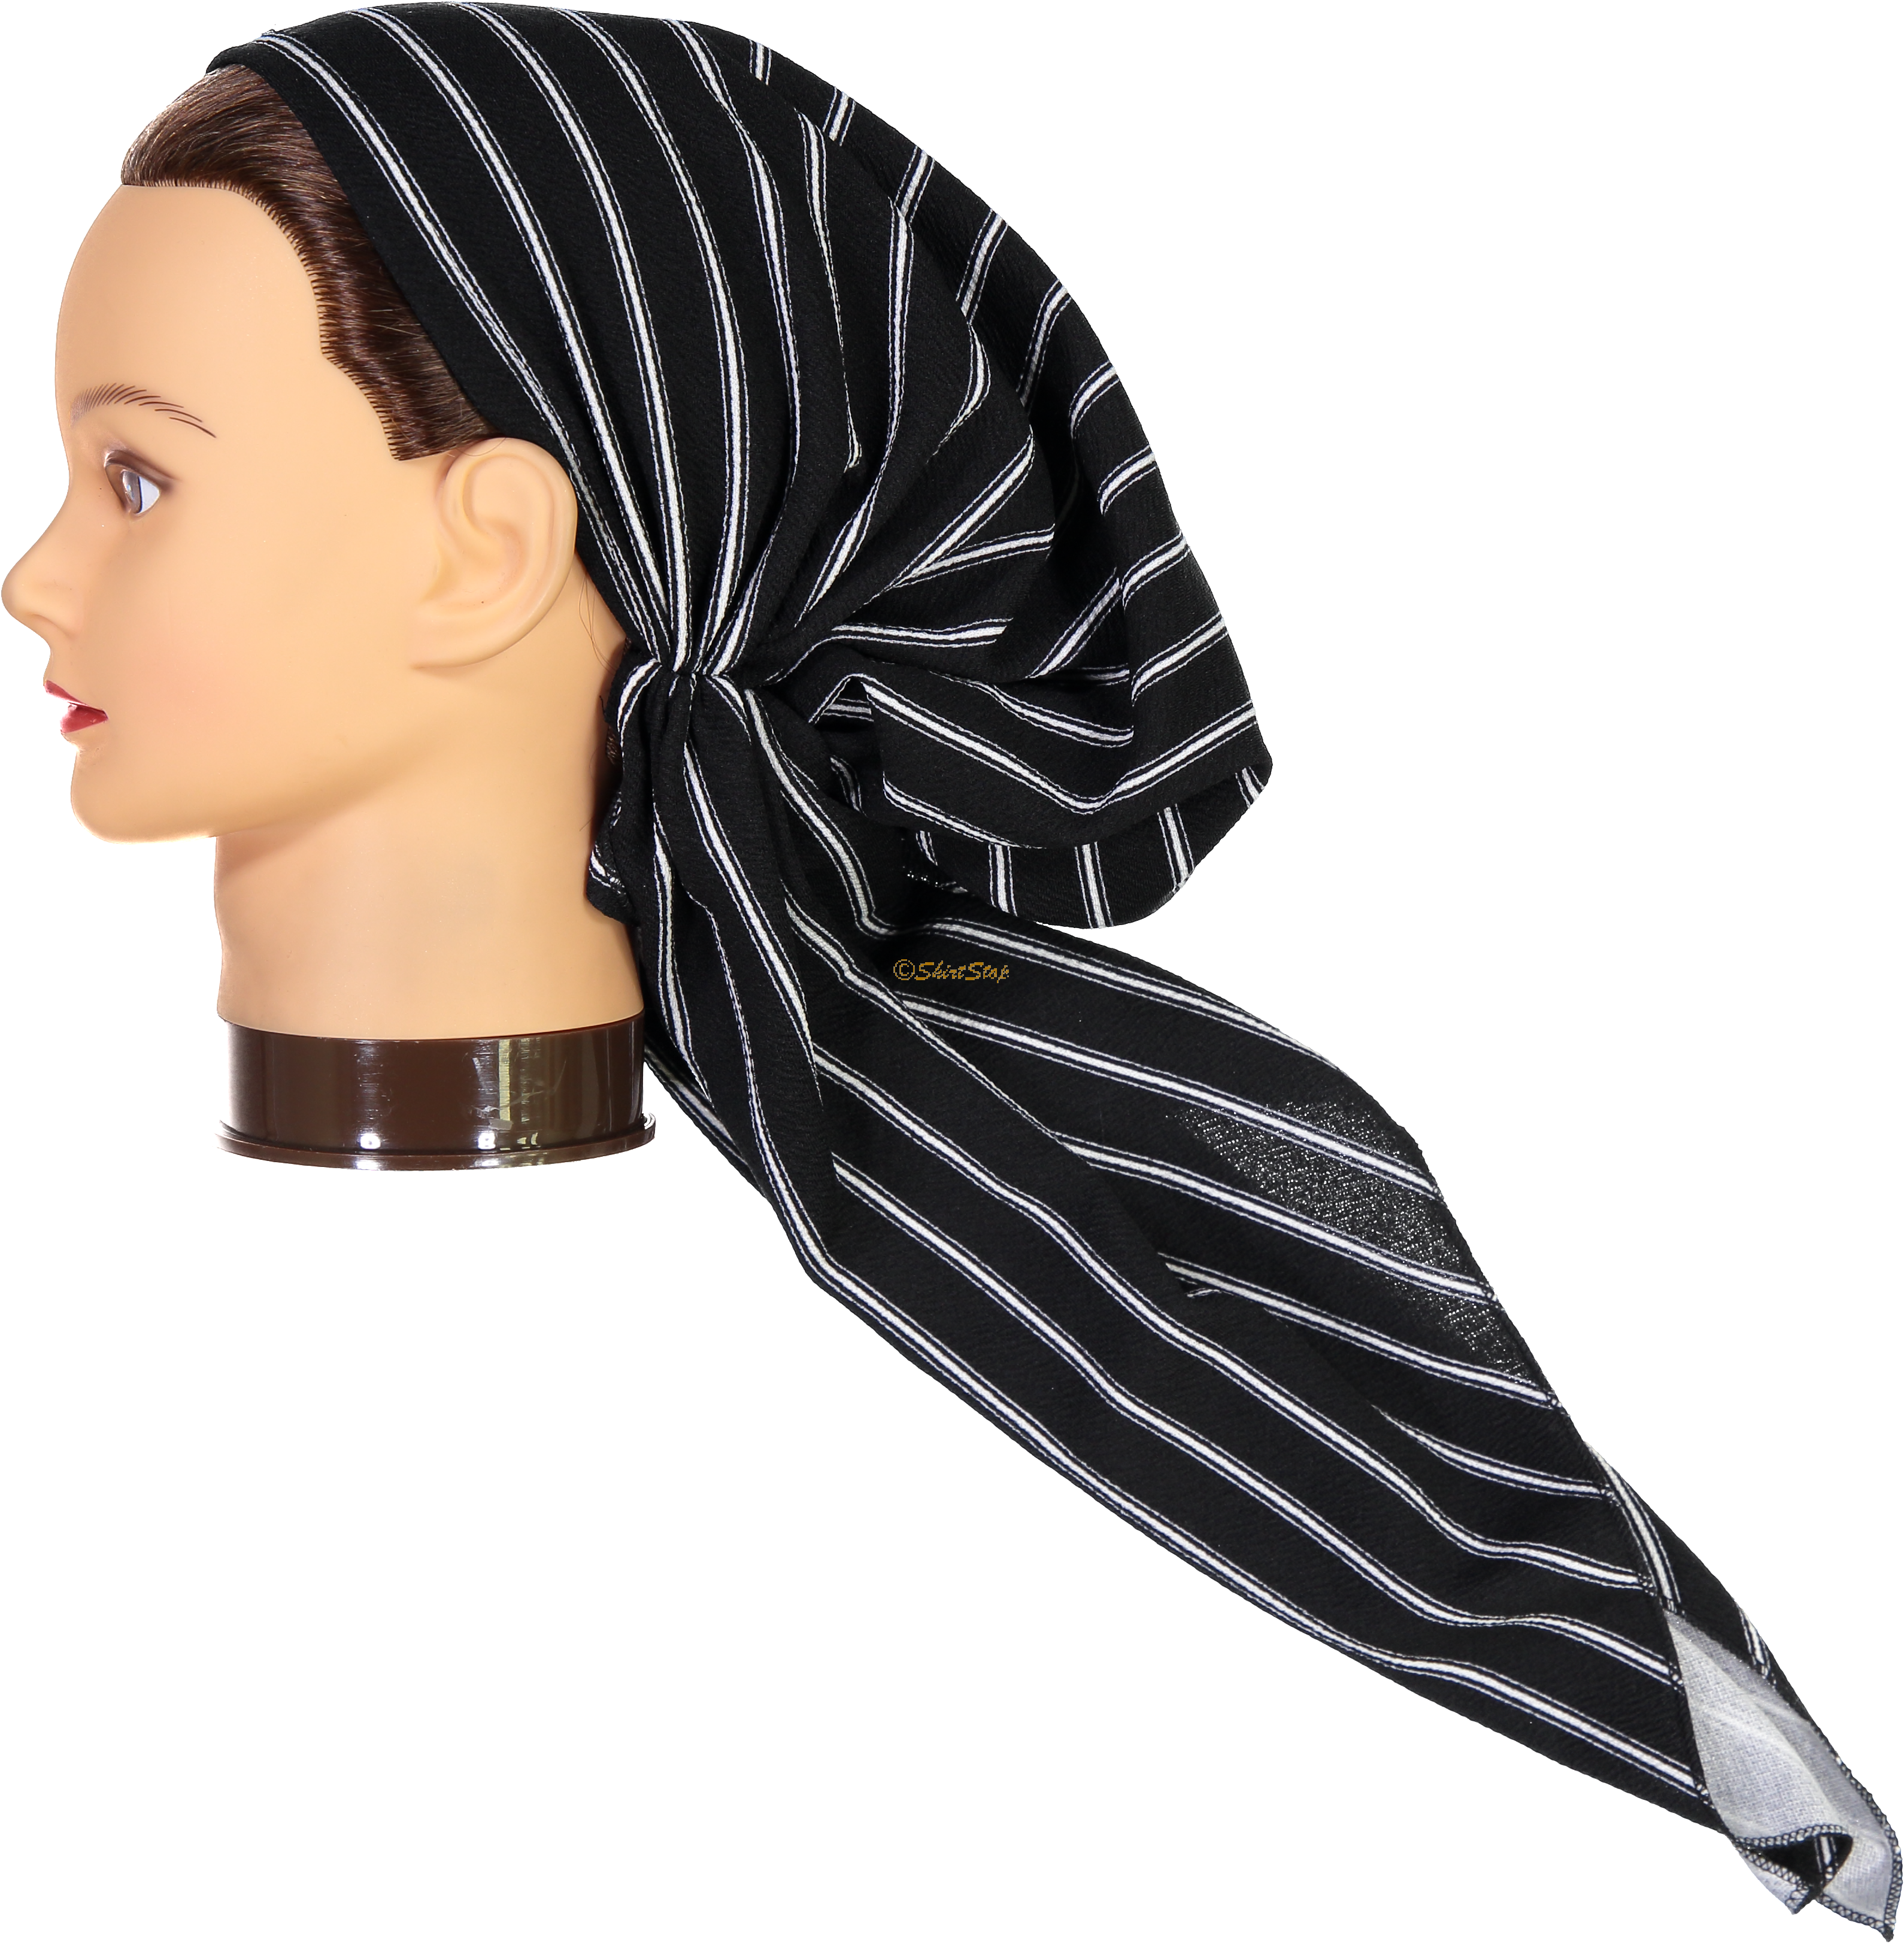 A Head With A Scarf On It